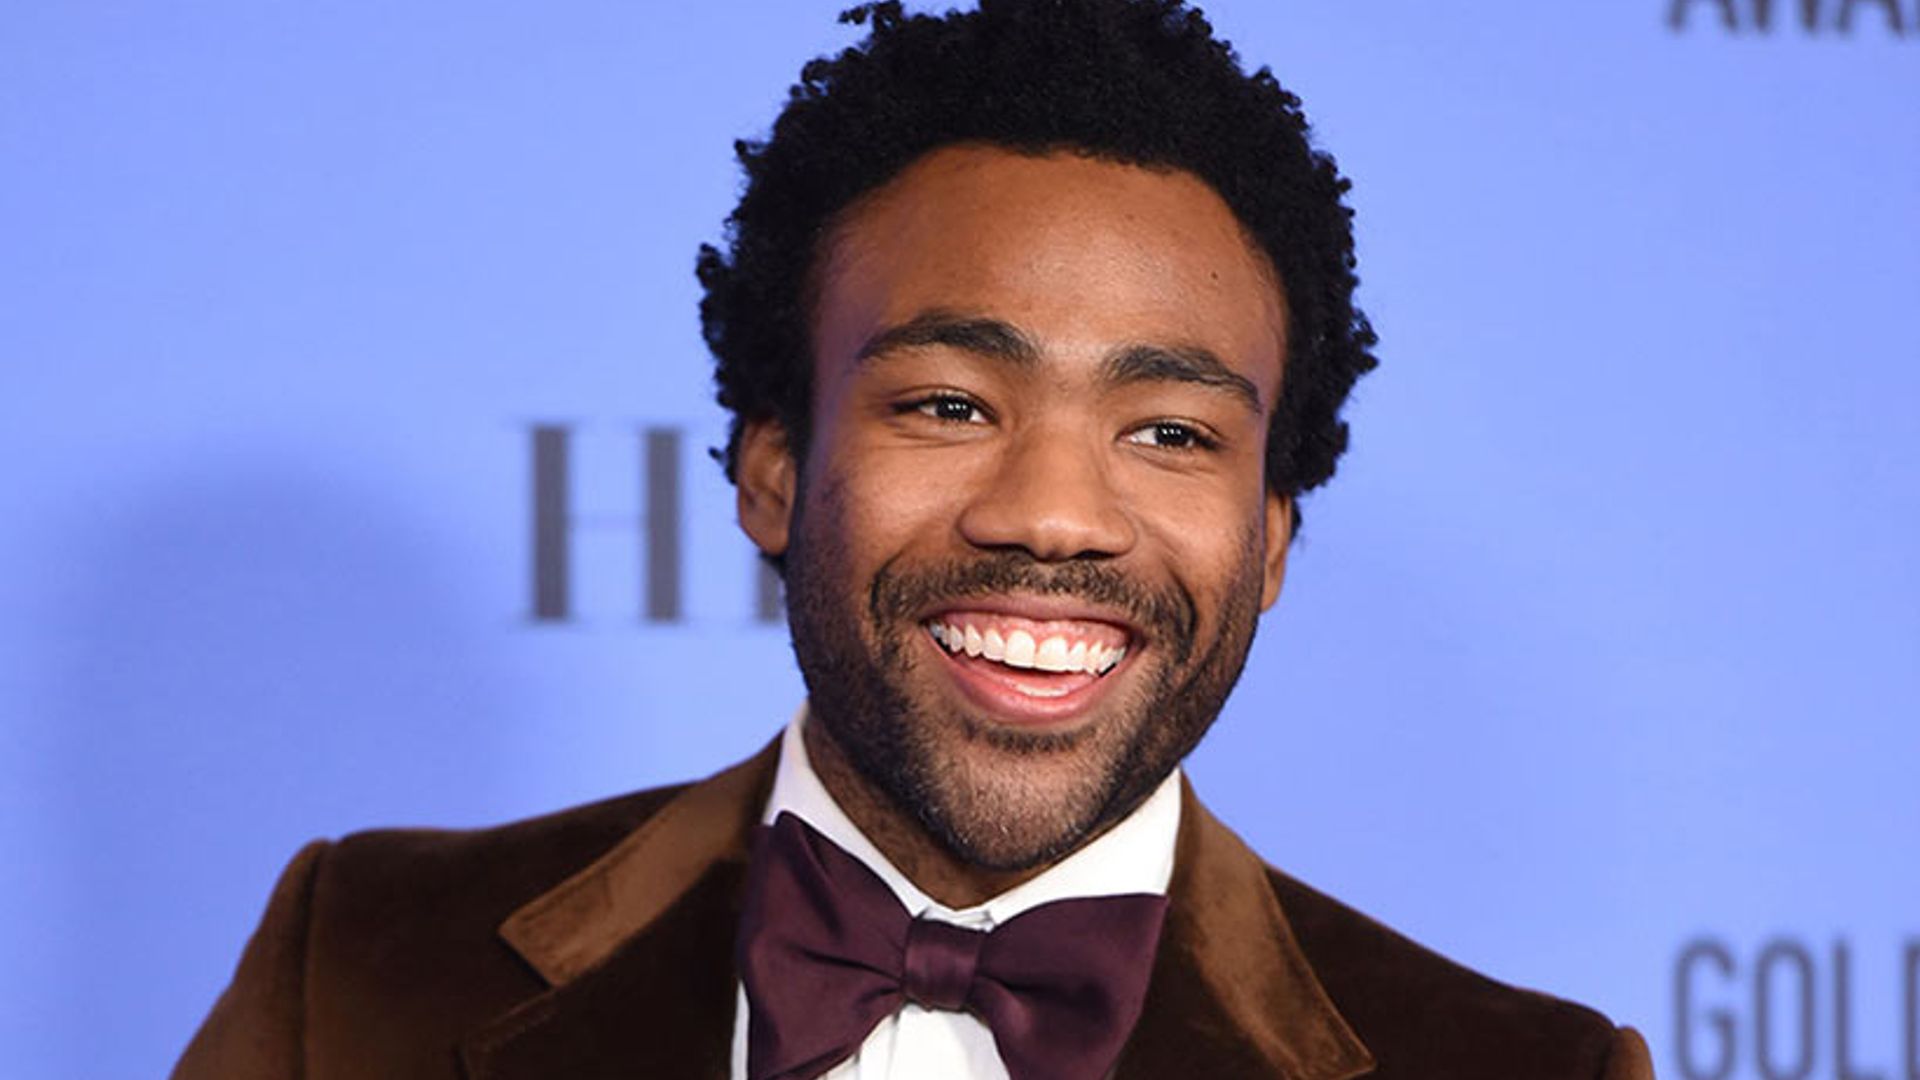 5 things you might not know about Donald Glover